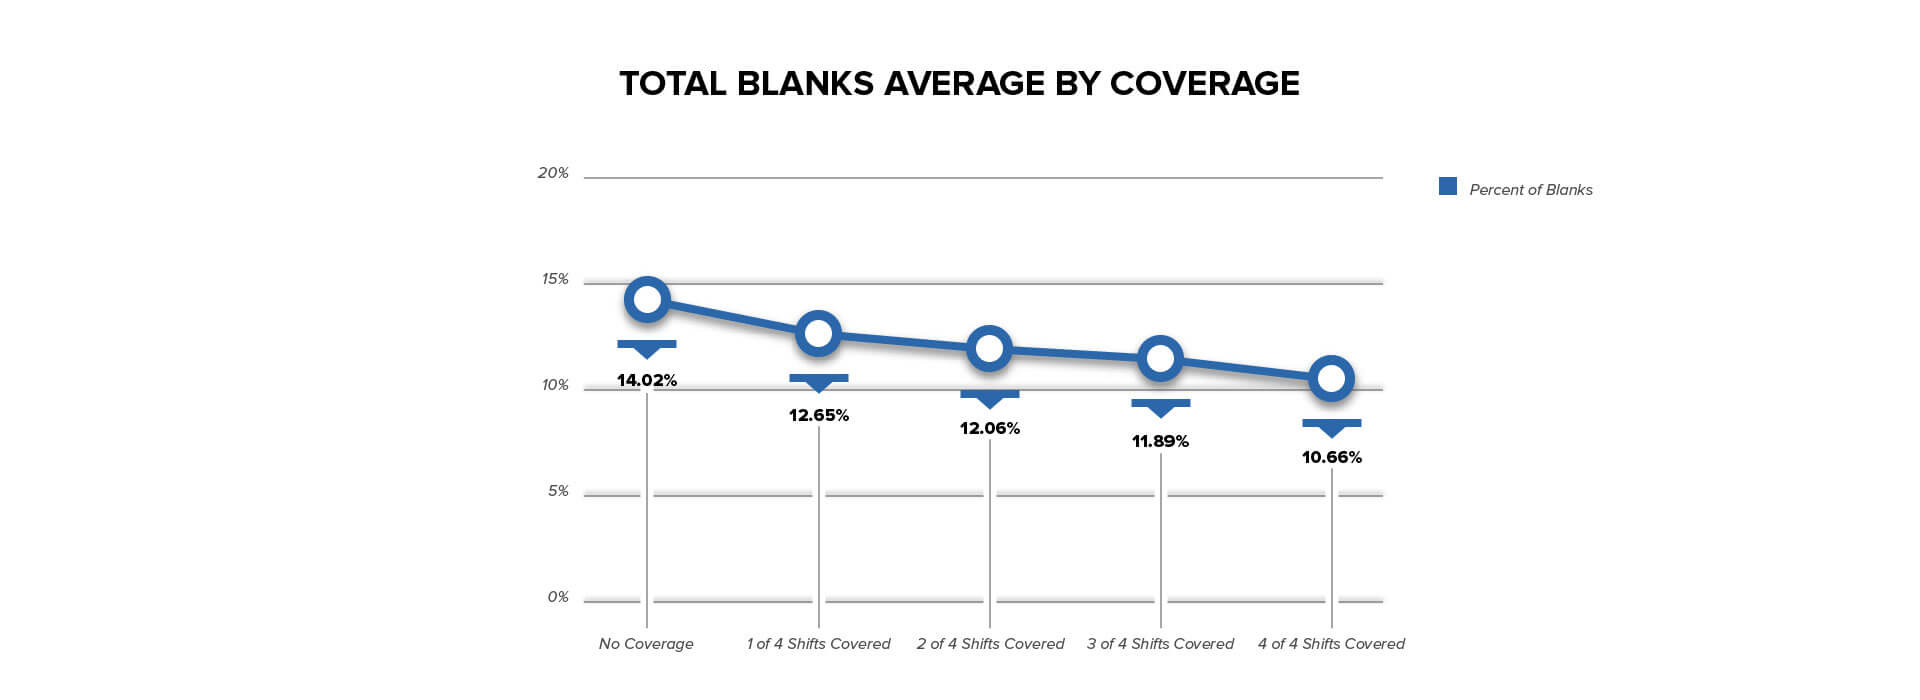 Total Blanks Average by Coverage